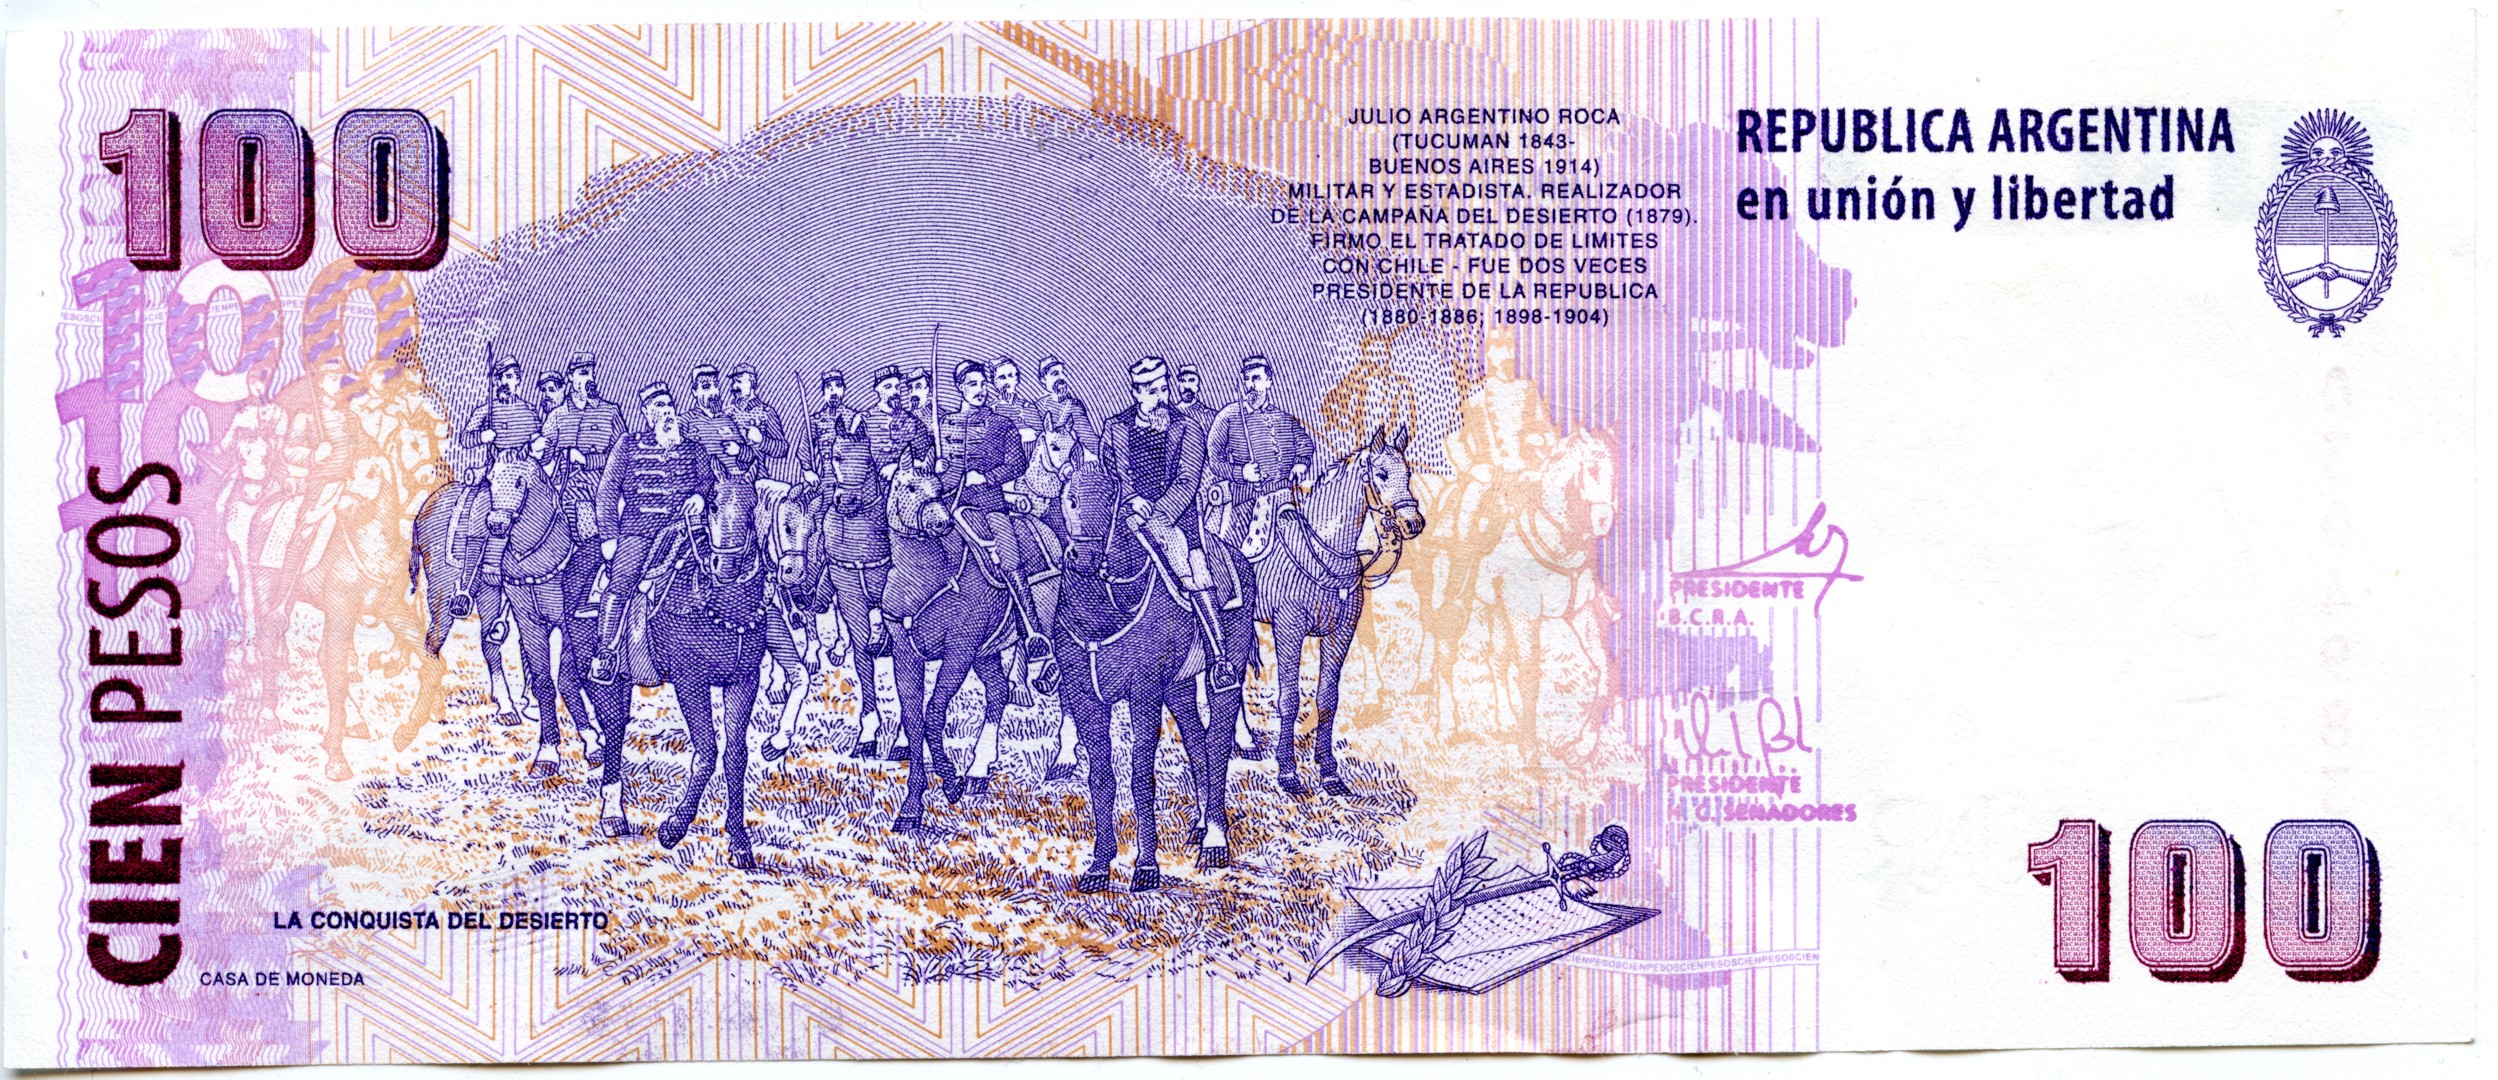 Man Made Argentine Peso HD Wallpaper | Background Image